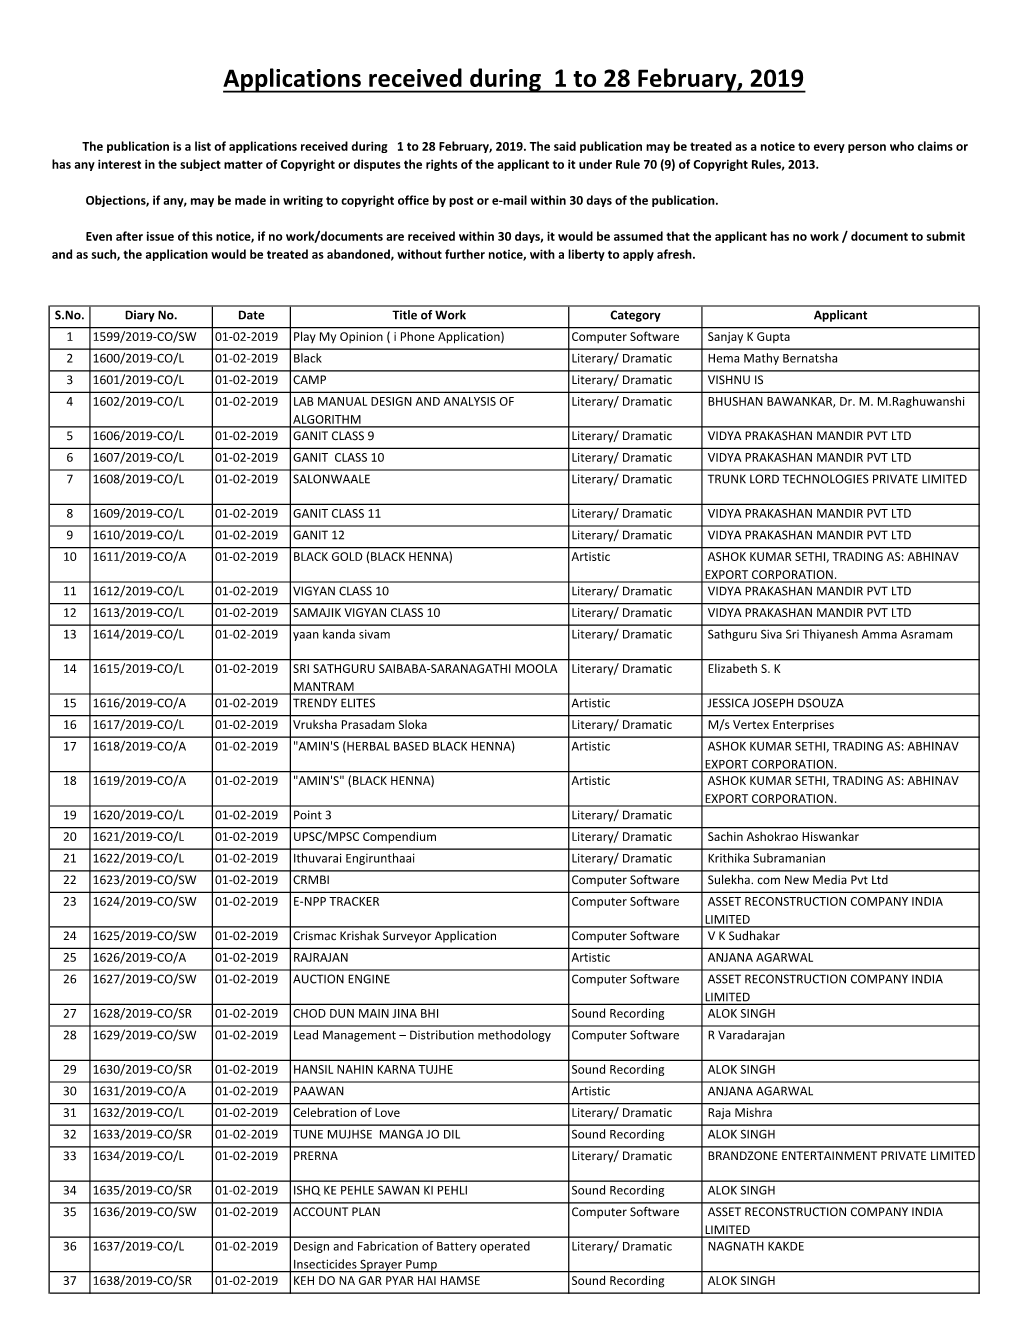 Applications Received During 1 to 28 February, 2019